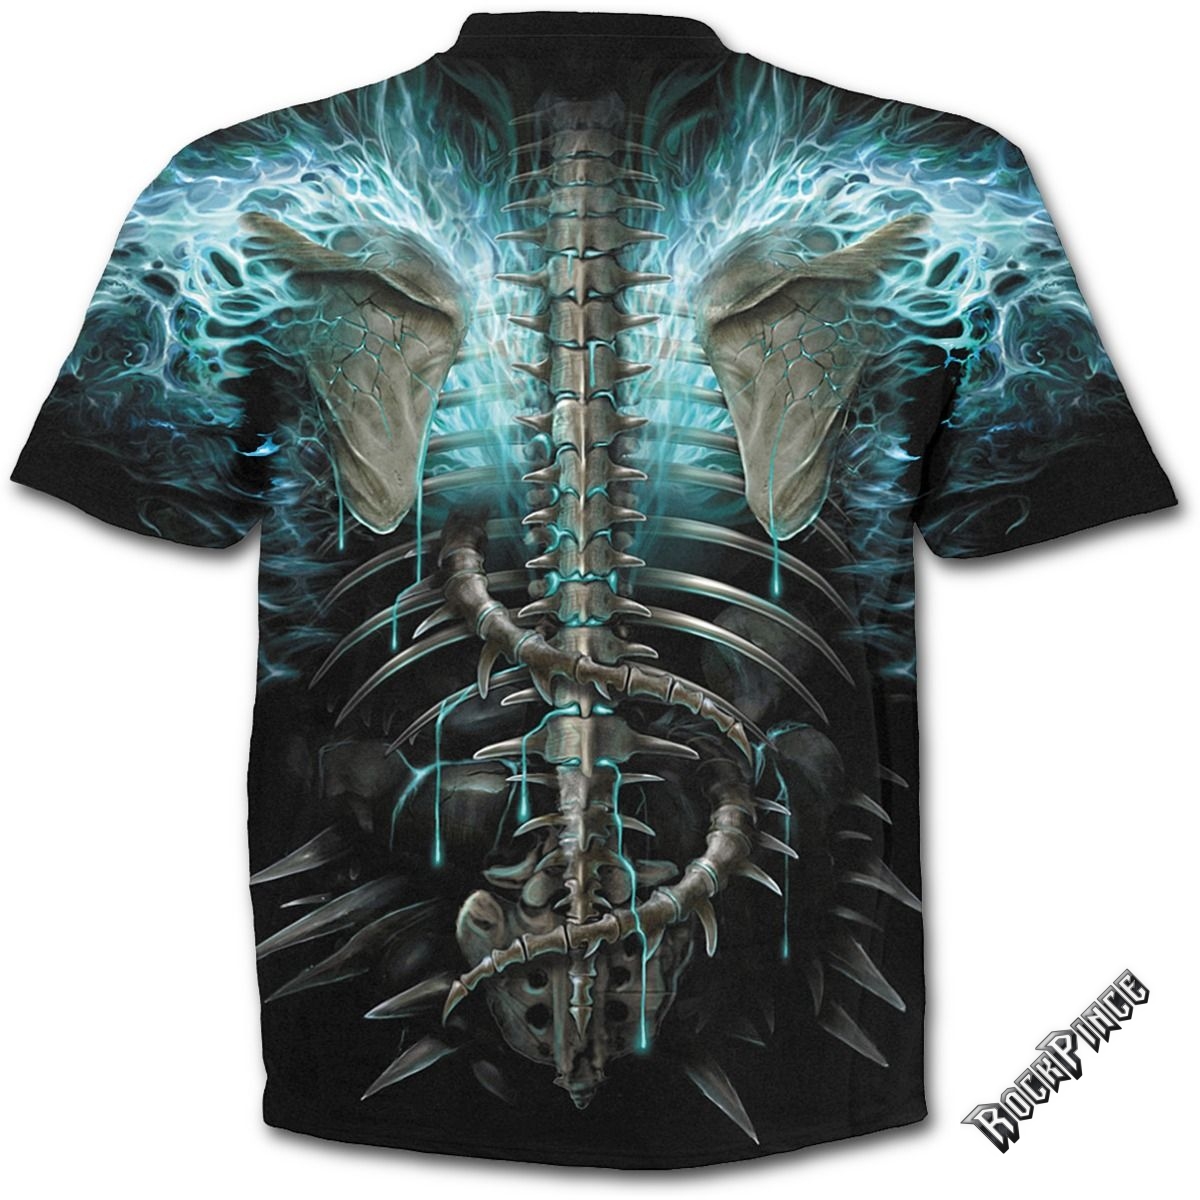 FLAMING SPINE - Allover T-Shirt Black - W016M105